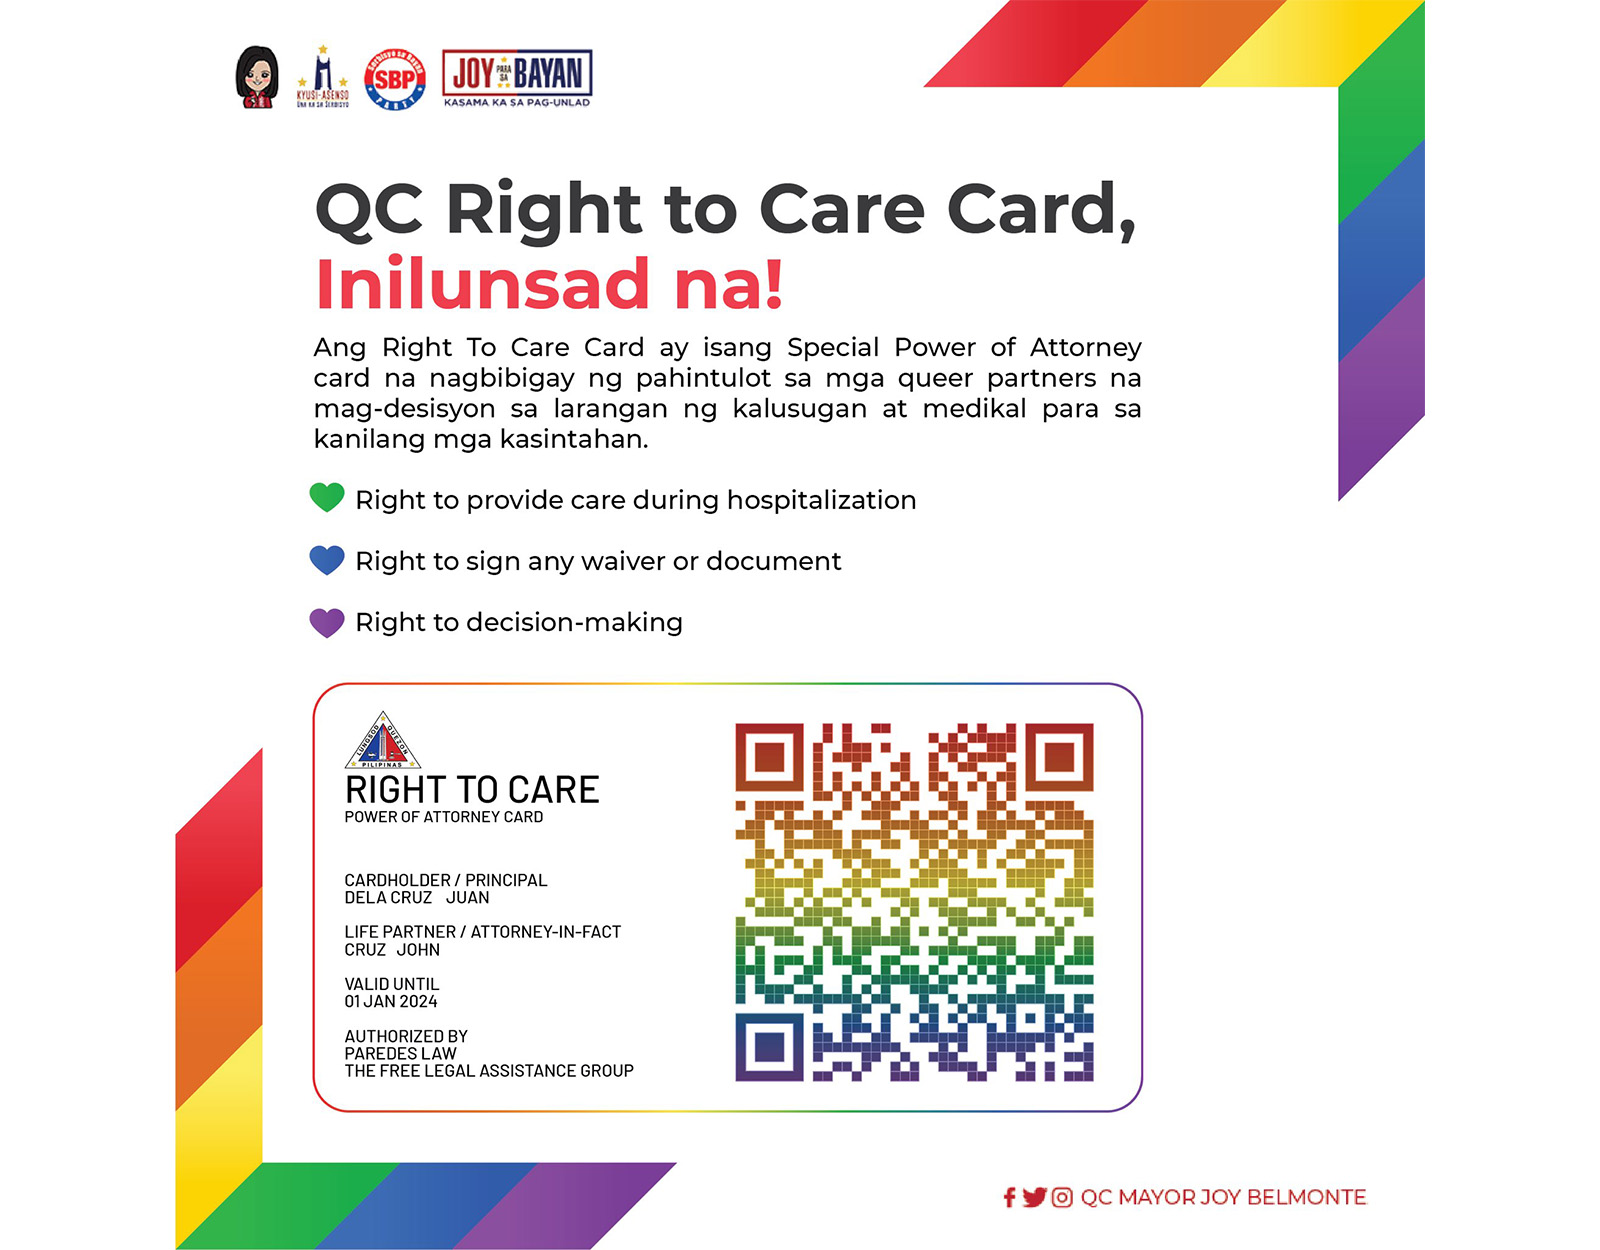 What You Need to Know About Quezon City's Right to Care Card